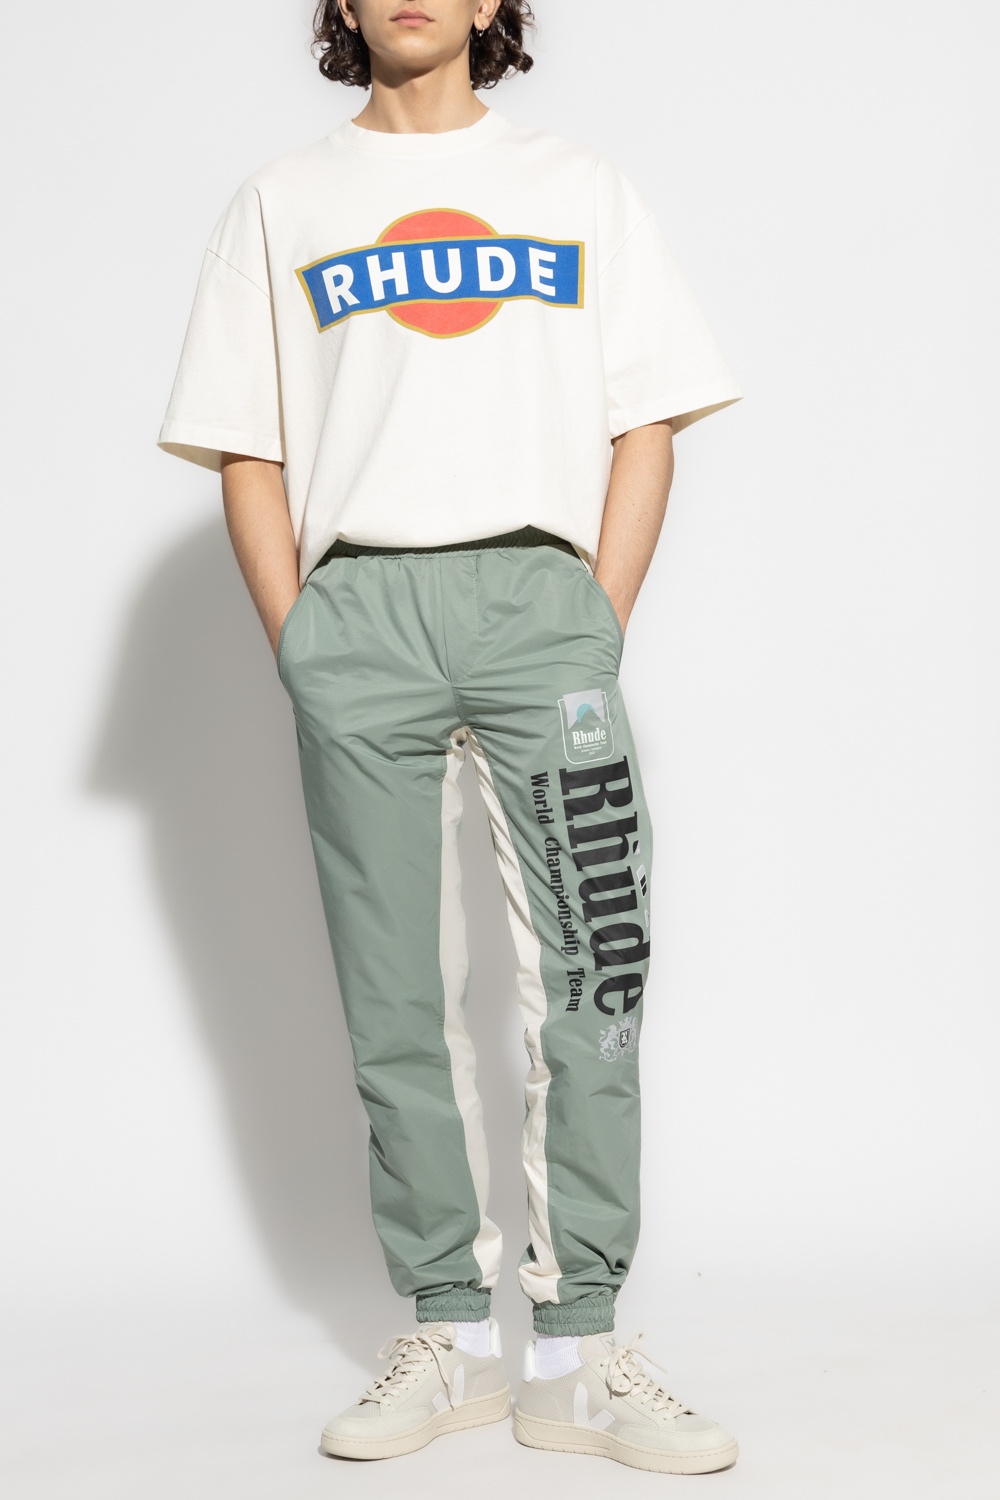 Rhude T-shirt HER with logo